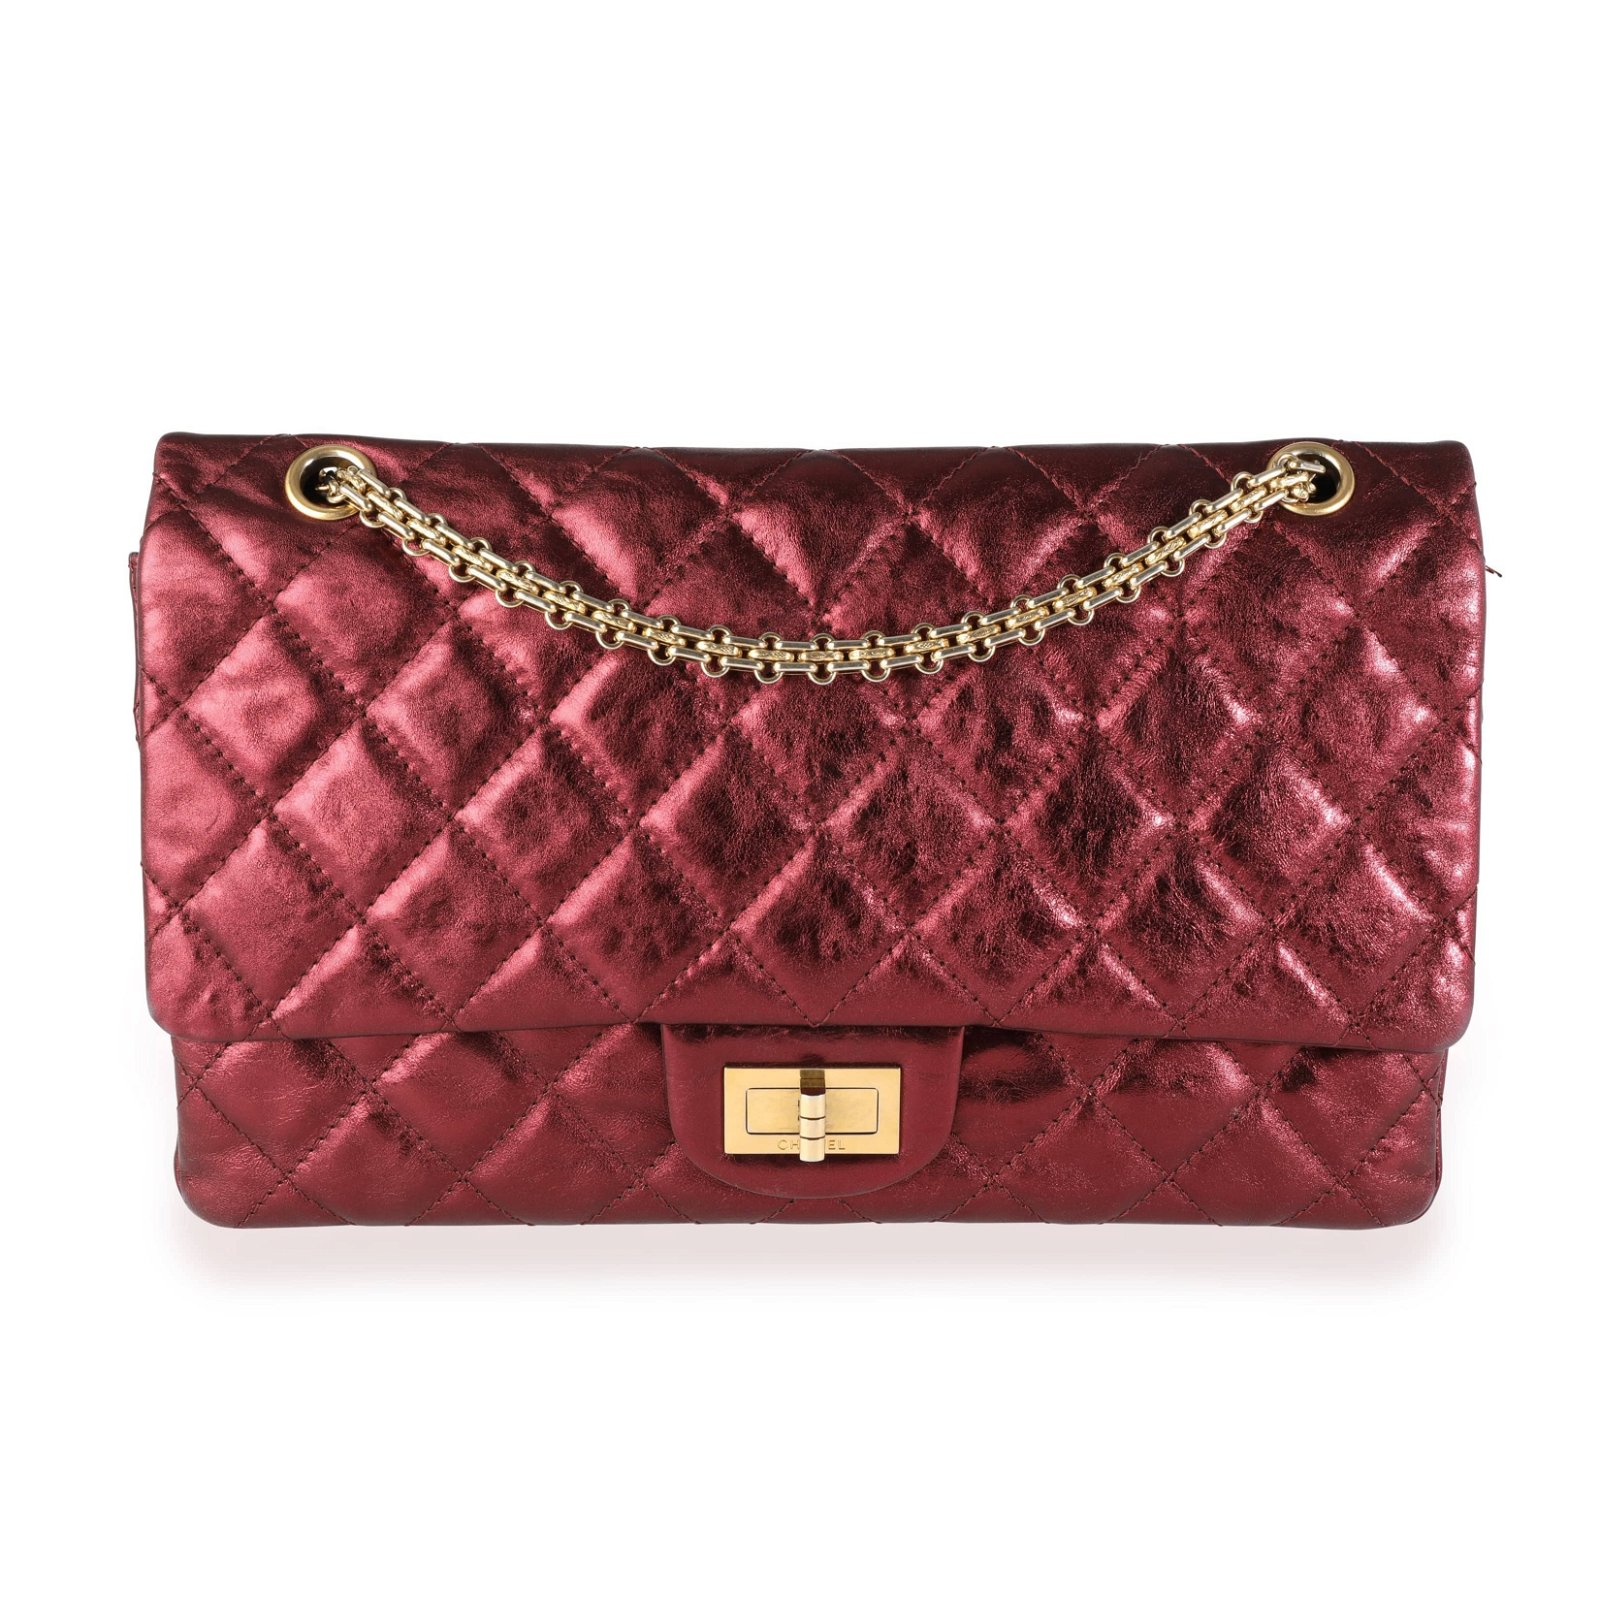 Image of Chanel Metallic Burgundy Quilted Calfskin Reissue 2.55 227 Double Flap Bag